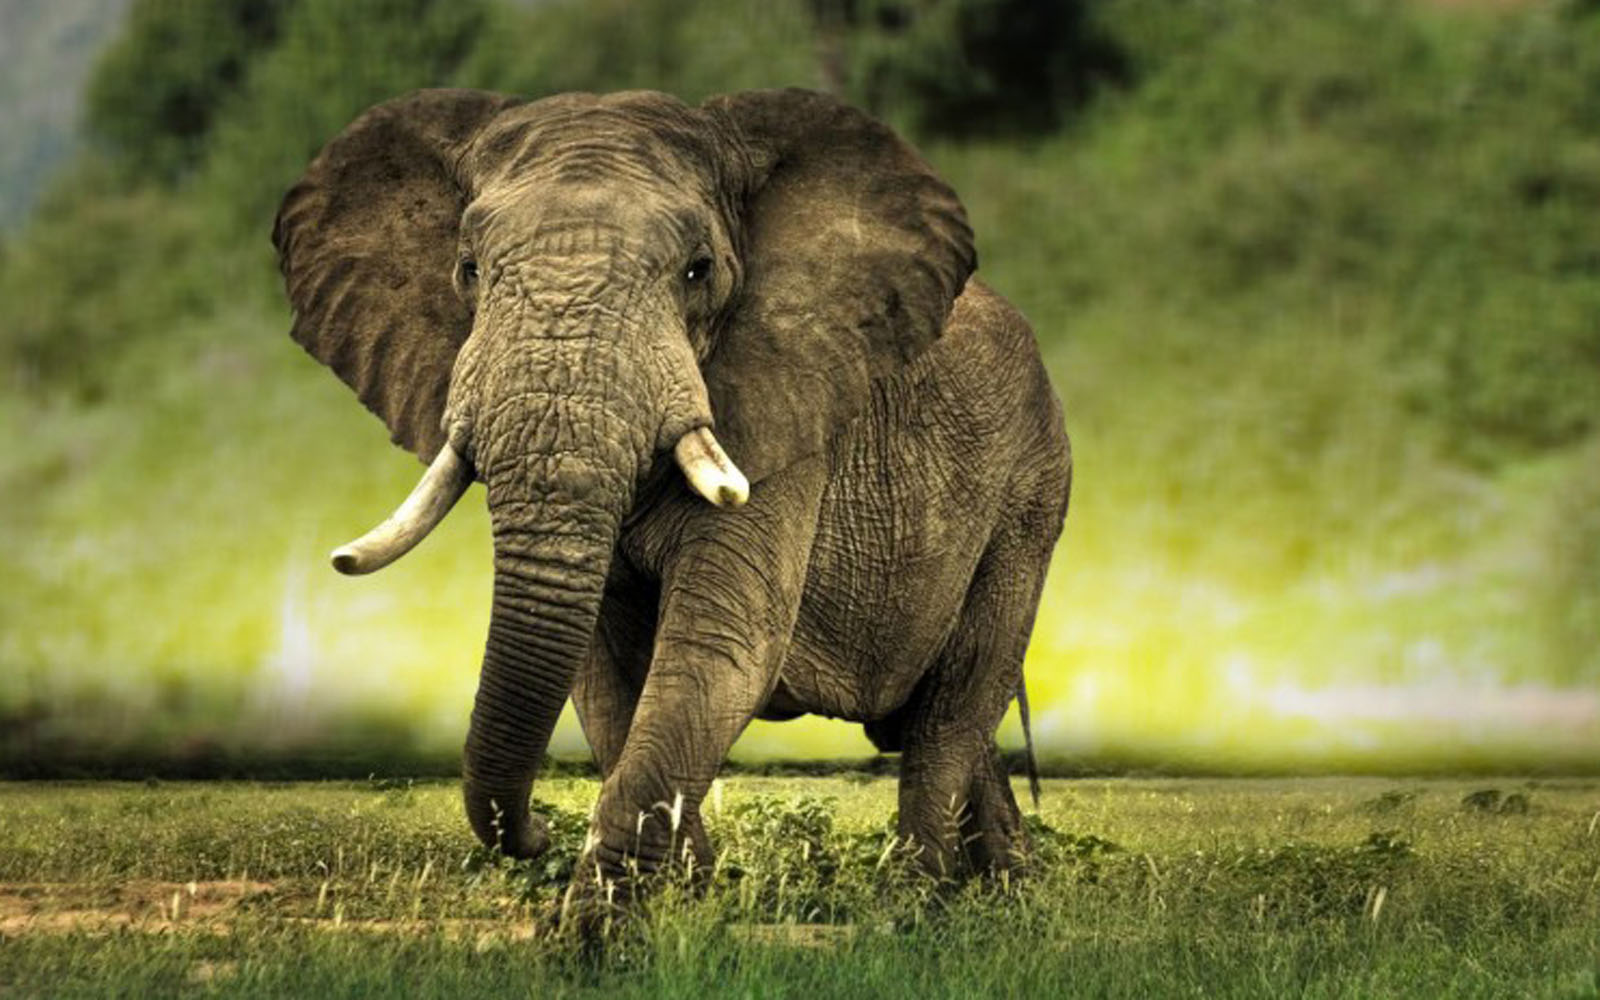 Elephant Wallpaper Background Photos Image And Pictures For